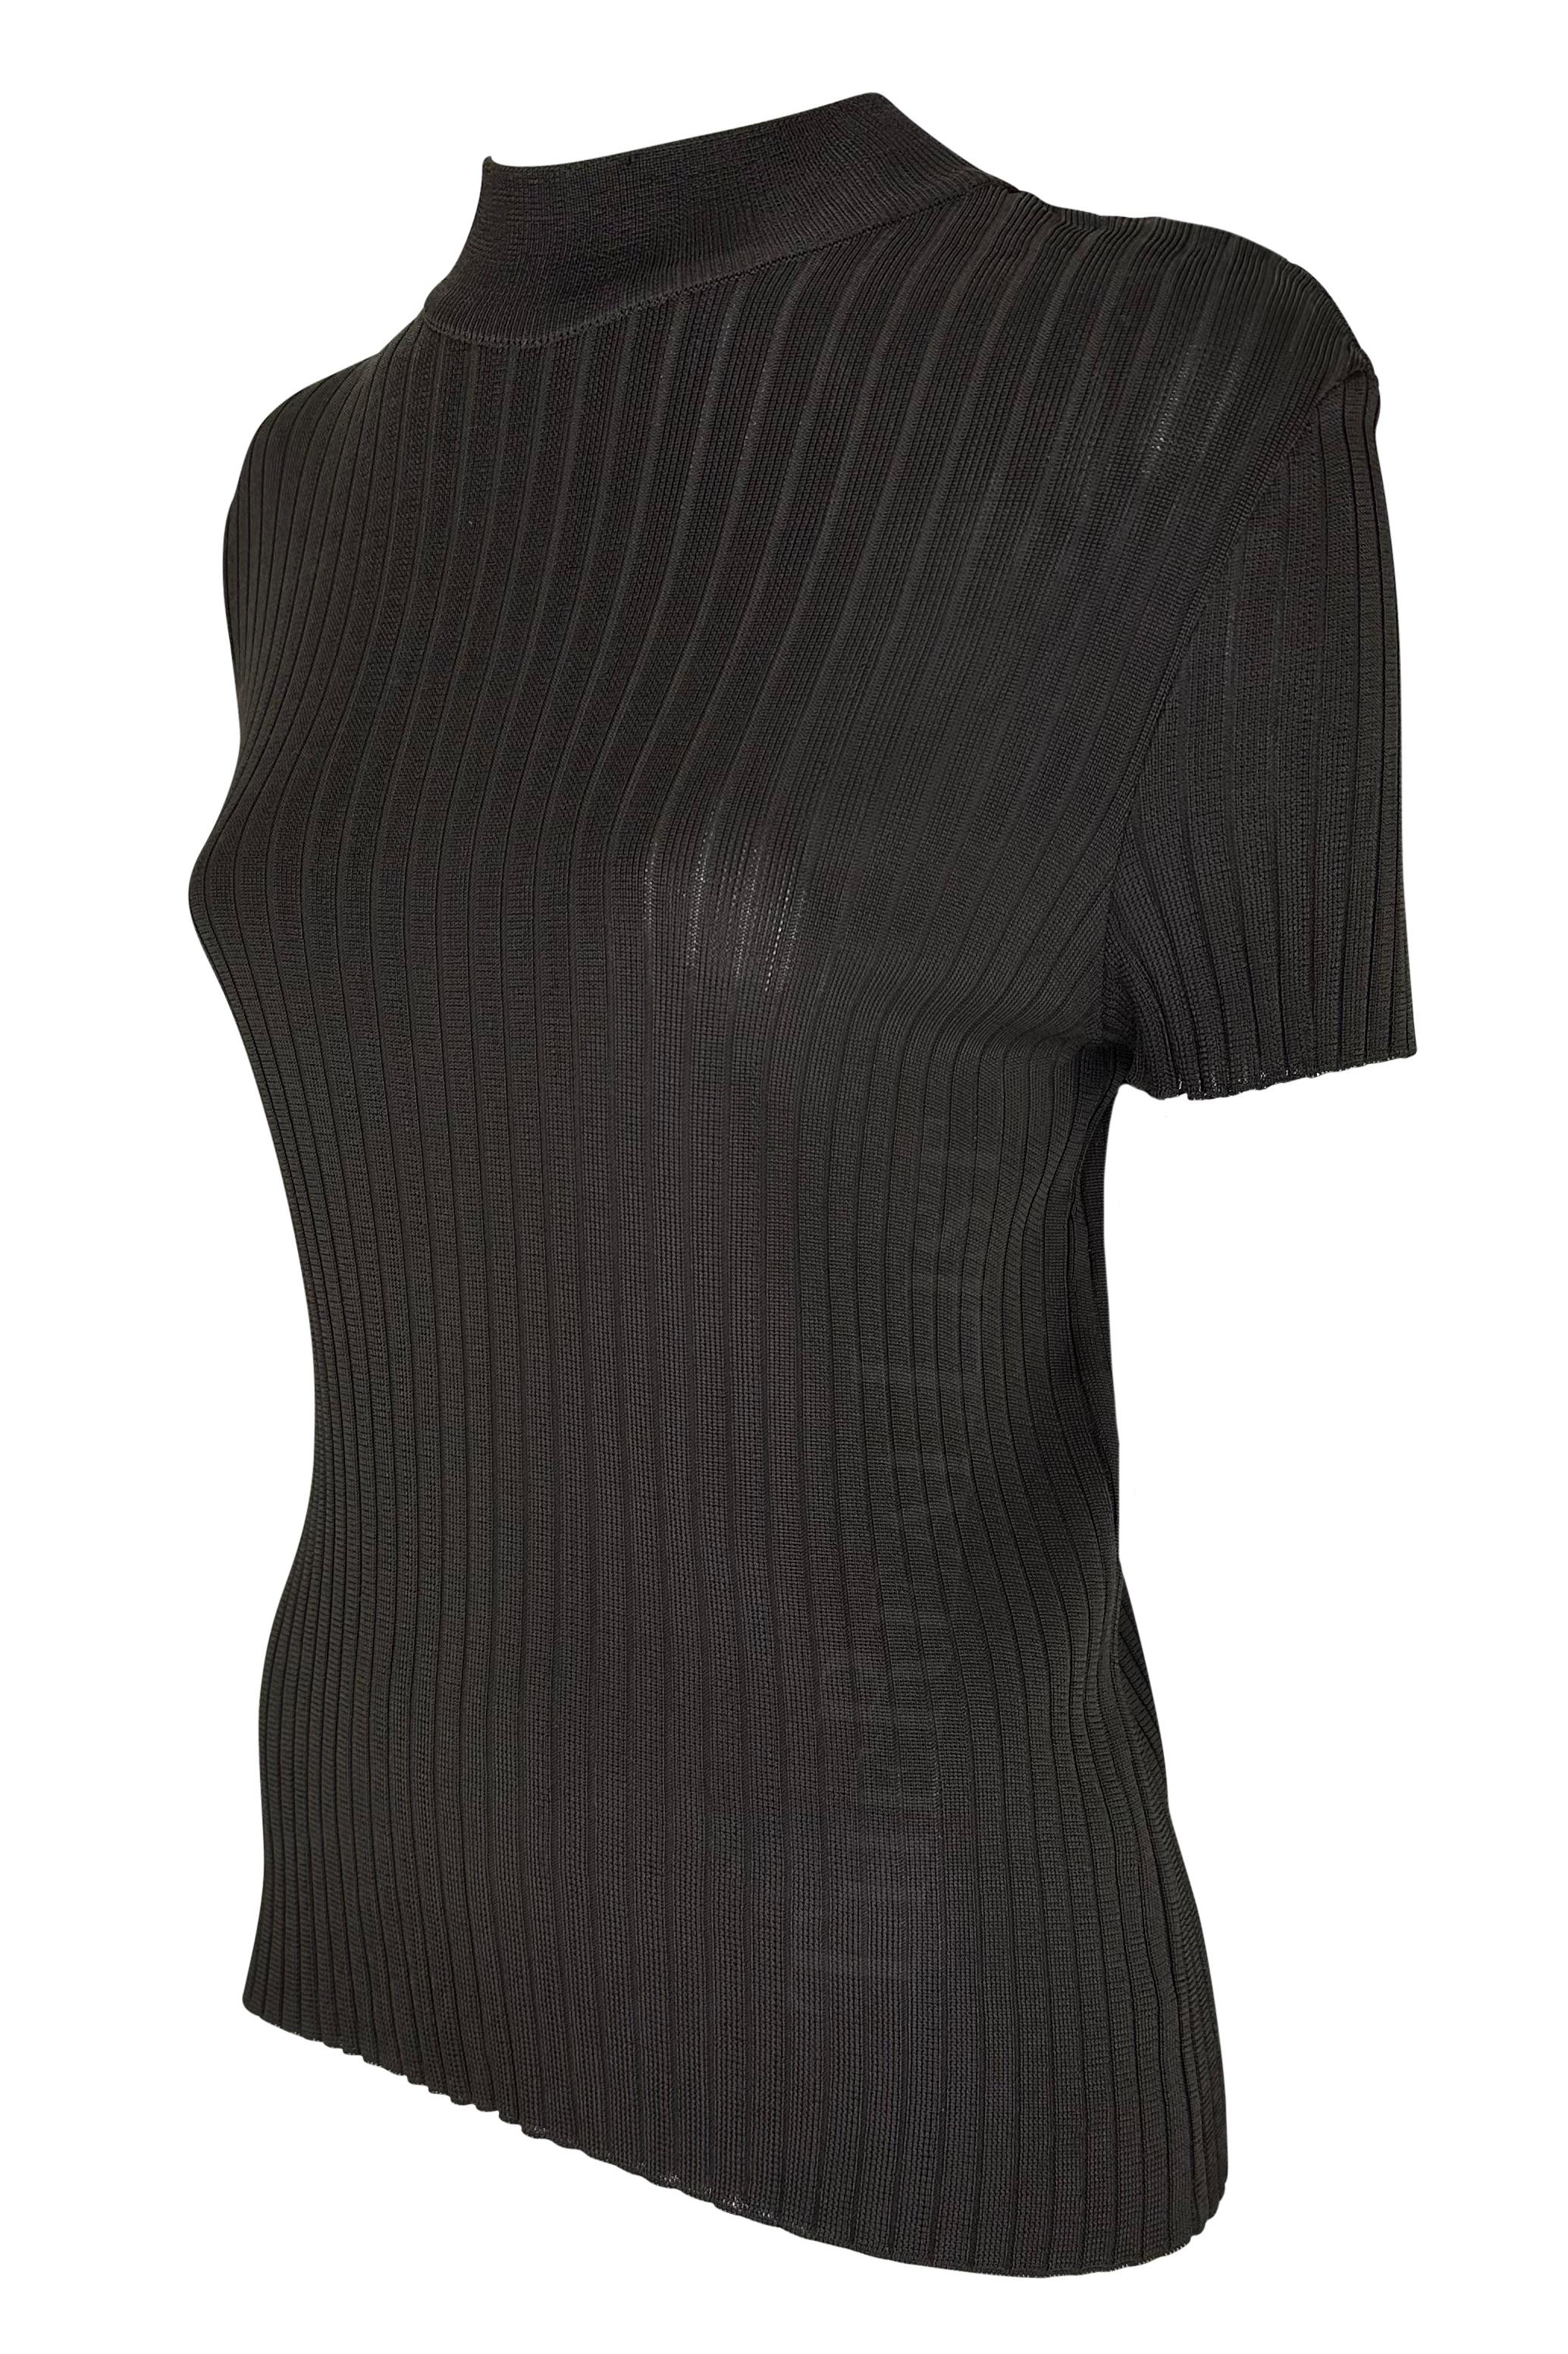 TheRealList presents: a fabulous brown knit Gucci top, designed by Tom Ford. From the Spring/Summer 1997 collection, this semi-sheer top features a vertical stripe pattern, mock neck, and short sleeves. The perfectly elevated closet staple, this